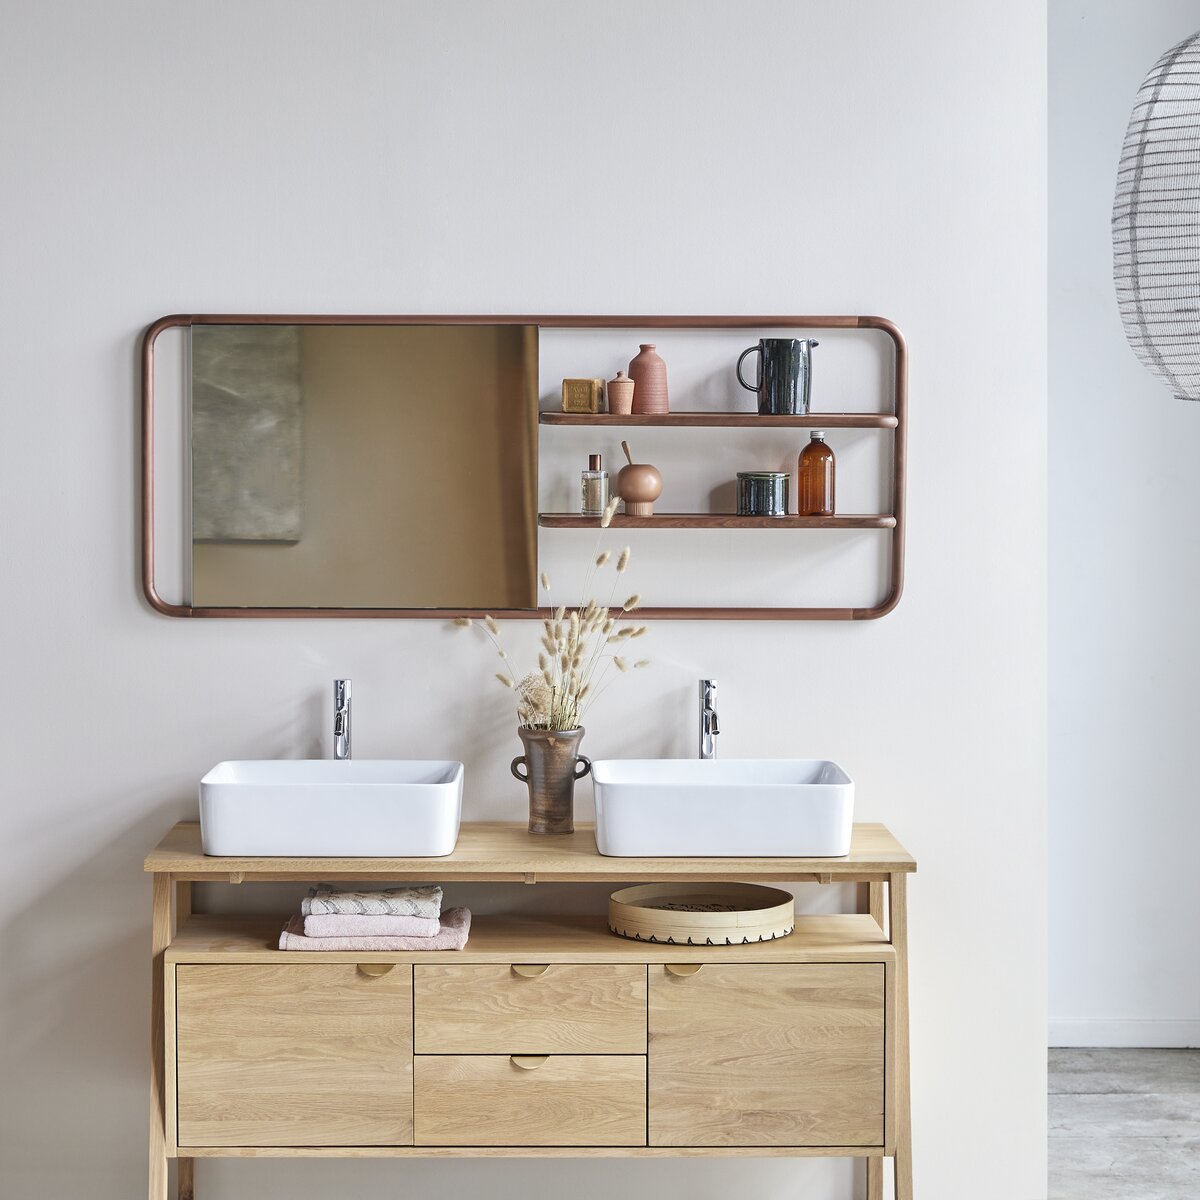 Félicie - Walnut and brass Mirror shelving unit